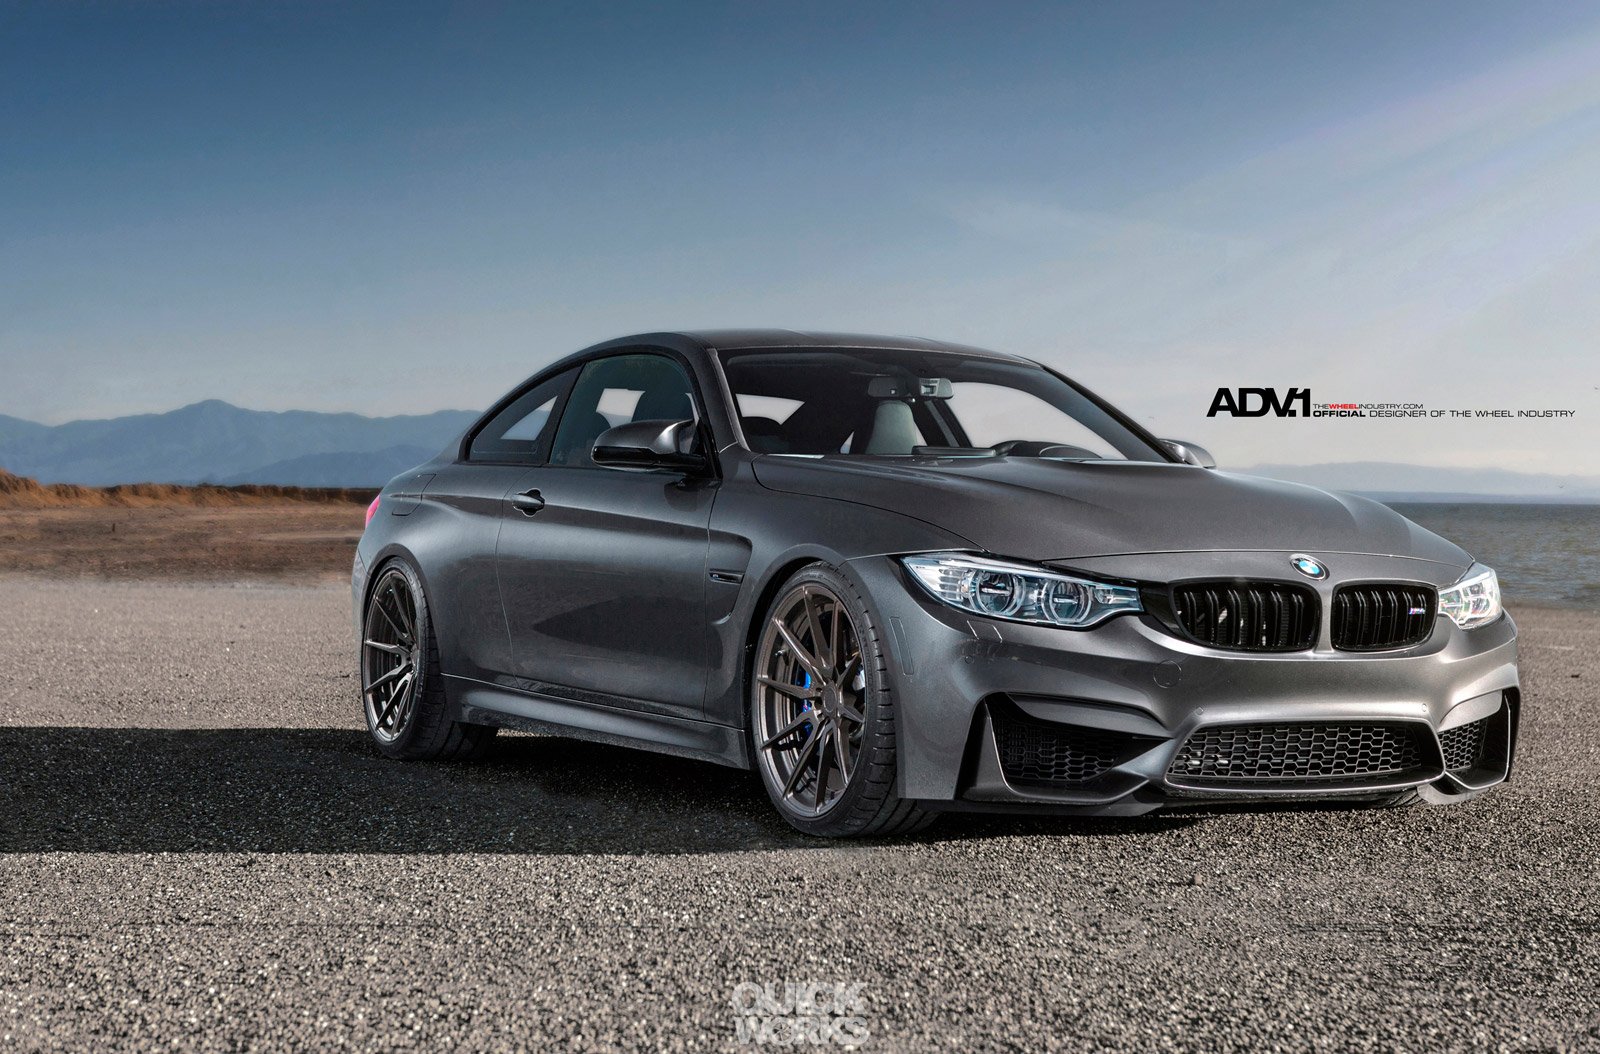 2014, Adv1, Wheel, Tuning, Bmw, M4, Coupe, Cars Wallpaper